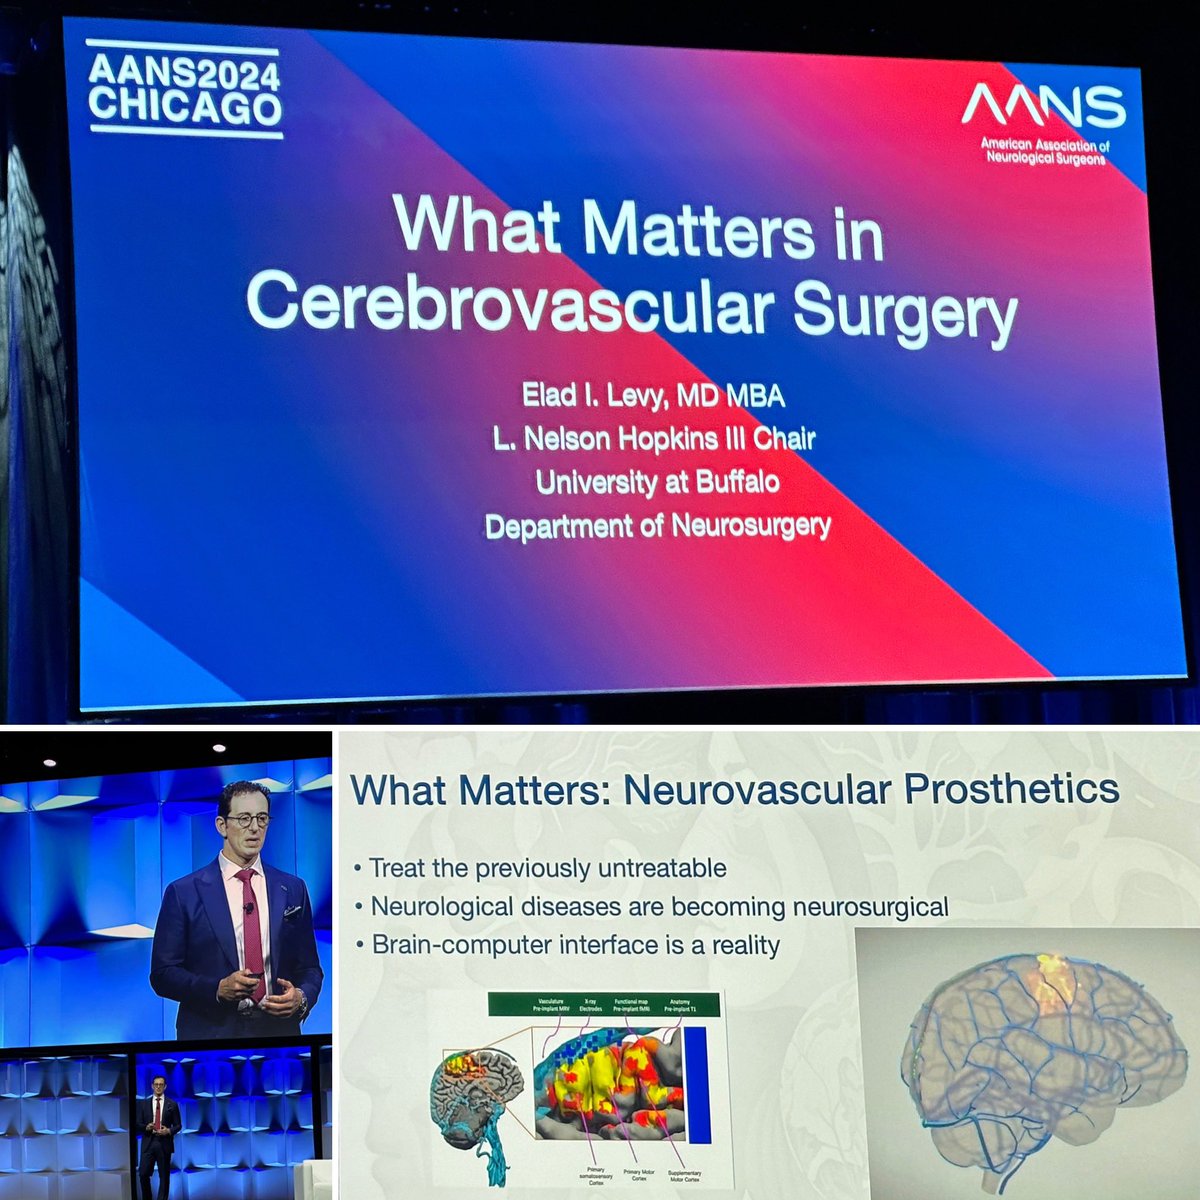 A great start to Plenary Session 3 with Dr. Levy @EladLevyMD on What Matters in Cerebrovascular Surgery! #AANS2024 @UB_Neurosurgery @IsaacYangMD @UCLANsgy @AANSNeuro #WhatMatters2Me #cerebrovascular #neurosurgery